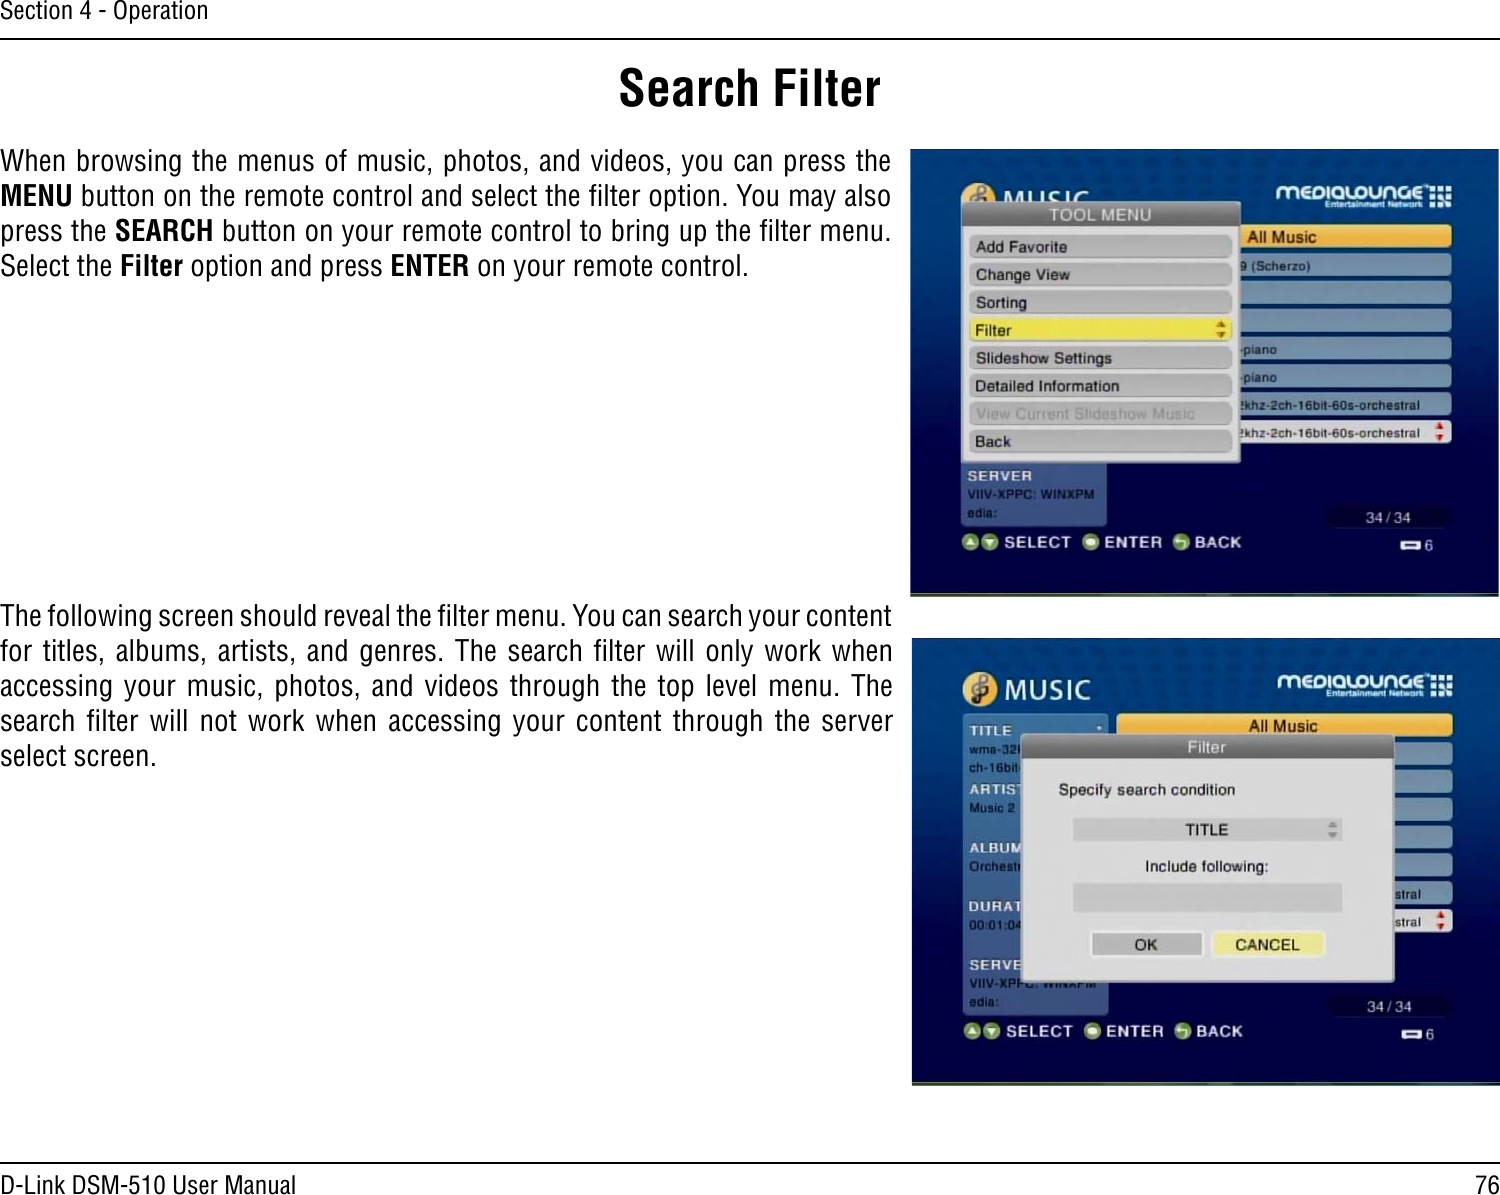 76D-Link DSM-510 User ManualSection 4 - OperationWhen browsing the menus of music, photos, and videos, you can press the MENU button on the remote control and select the ﬁlter option. You may also press the SEARCH button on your remote control to bring up the ﬁlter menu. Select the Filter option and press ENTER on your remote control.The following screen should reveal the ﬁlter menu. You can search your content for titles, albums,  artists, and genres.  The search ﬁlter will only work when accessing your  music,  photos, and videos  through  the top  level  menu. The search  ﬁlter  will  not  work  when  accessing  your  content  through  the  server select screen.Search Filter